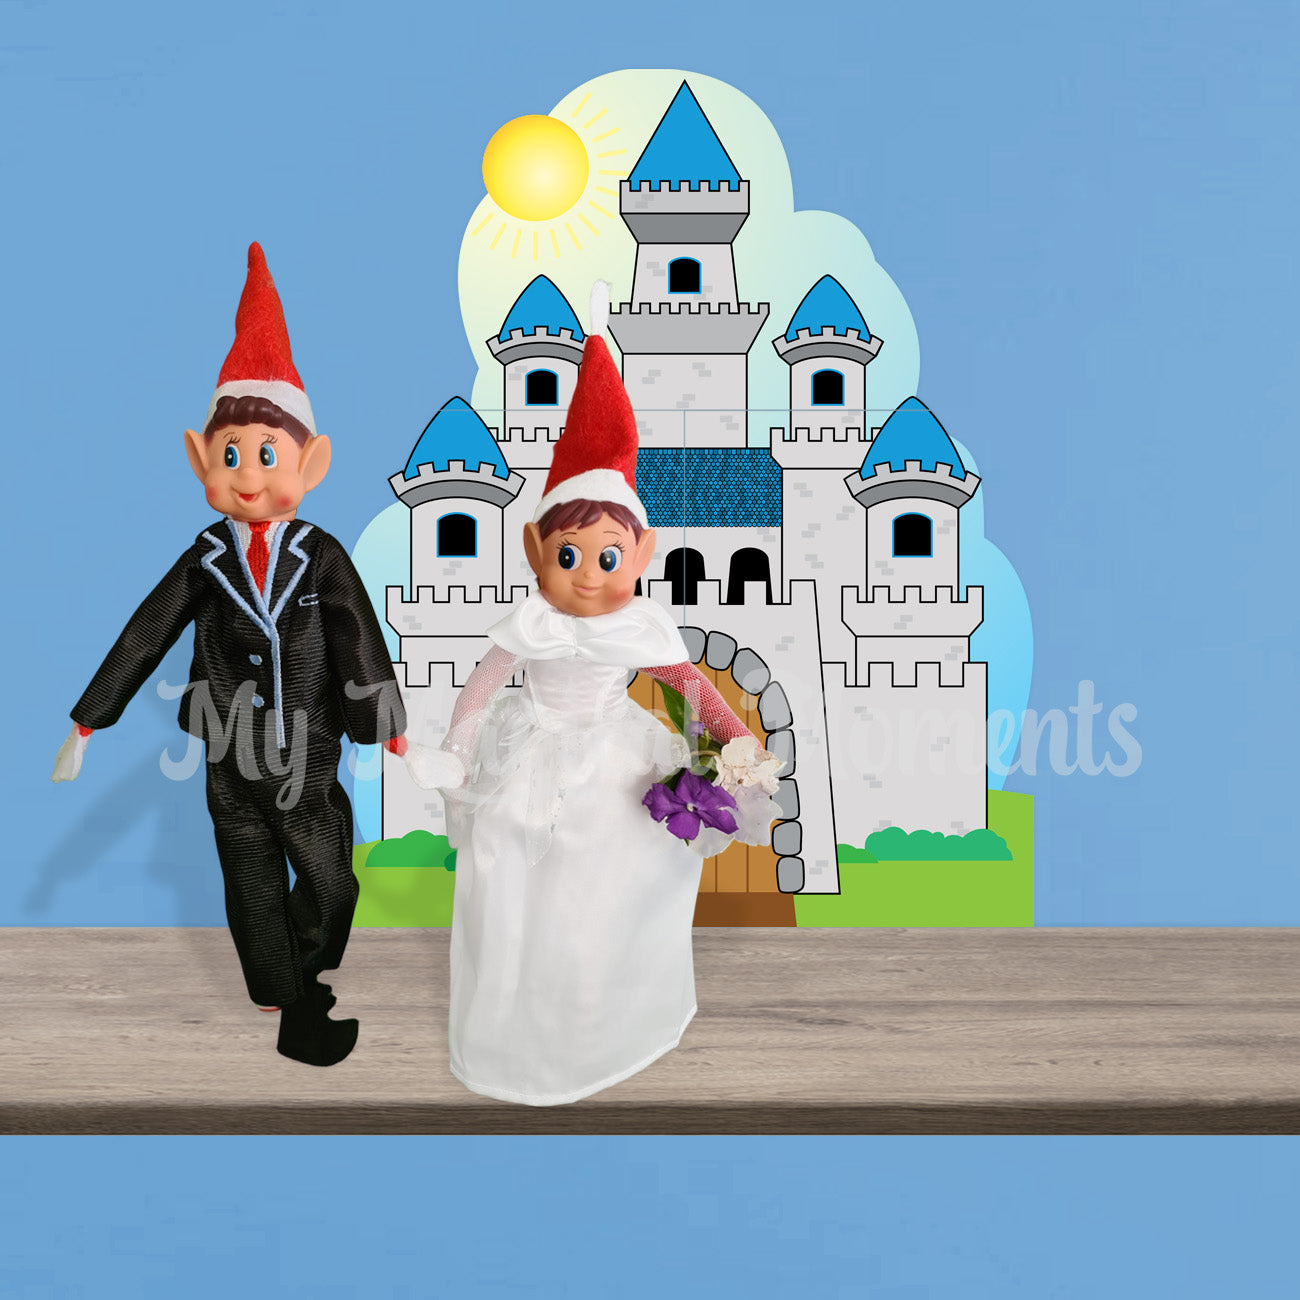 Elves getting married in front of a castle